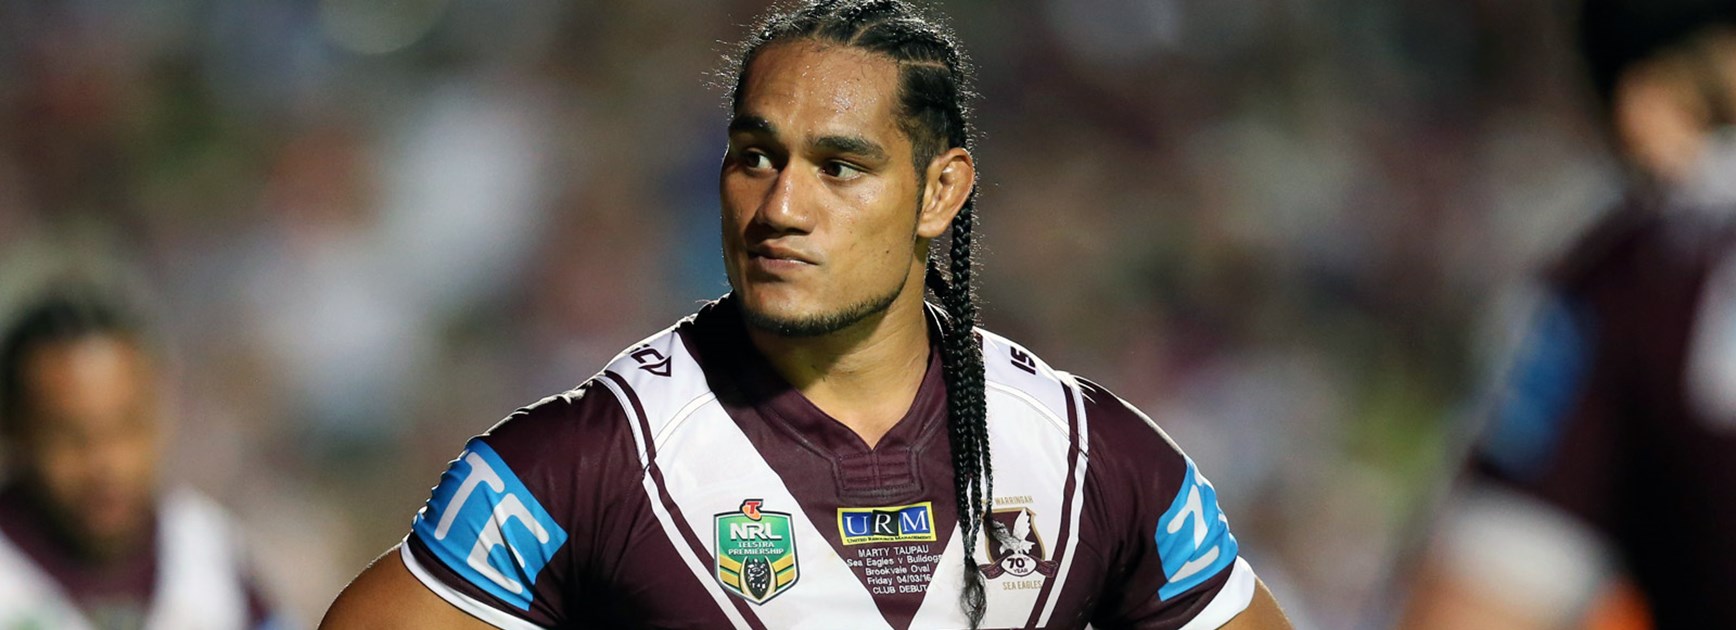 Sea Eagles lock Marty Taupau looks on dejected in his Manly debut.